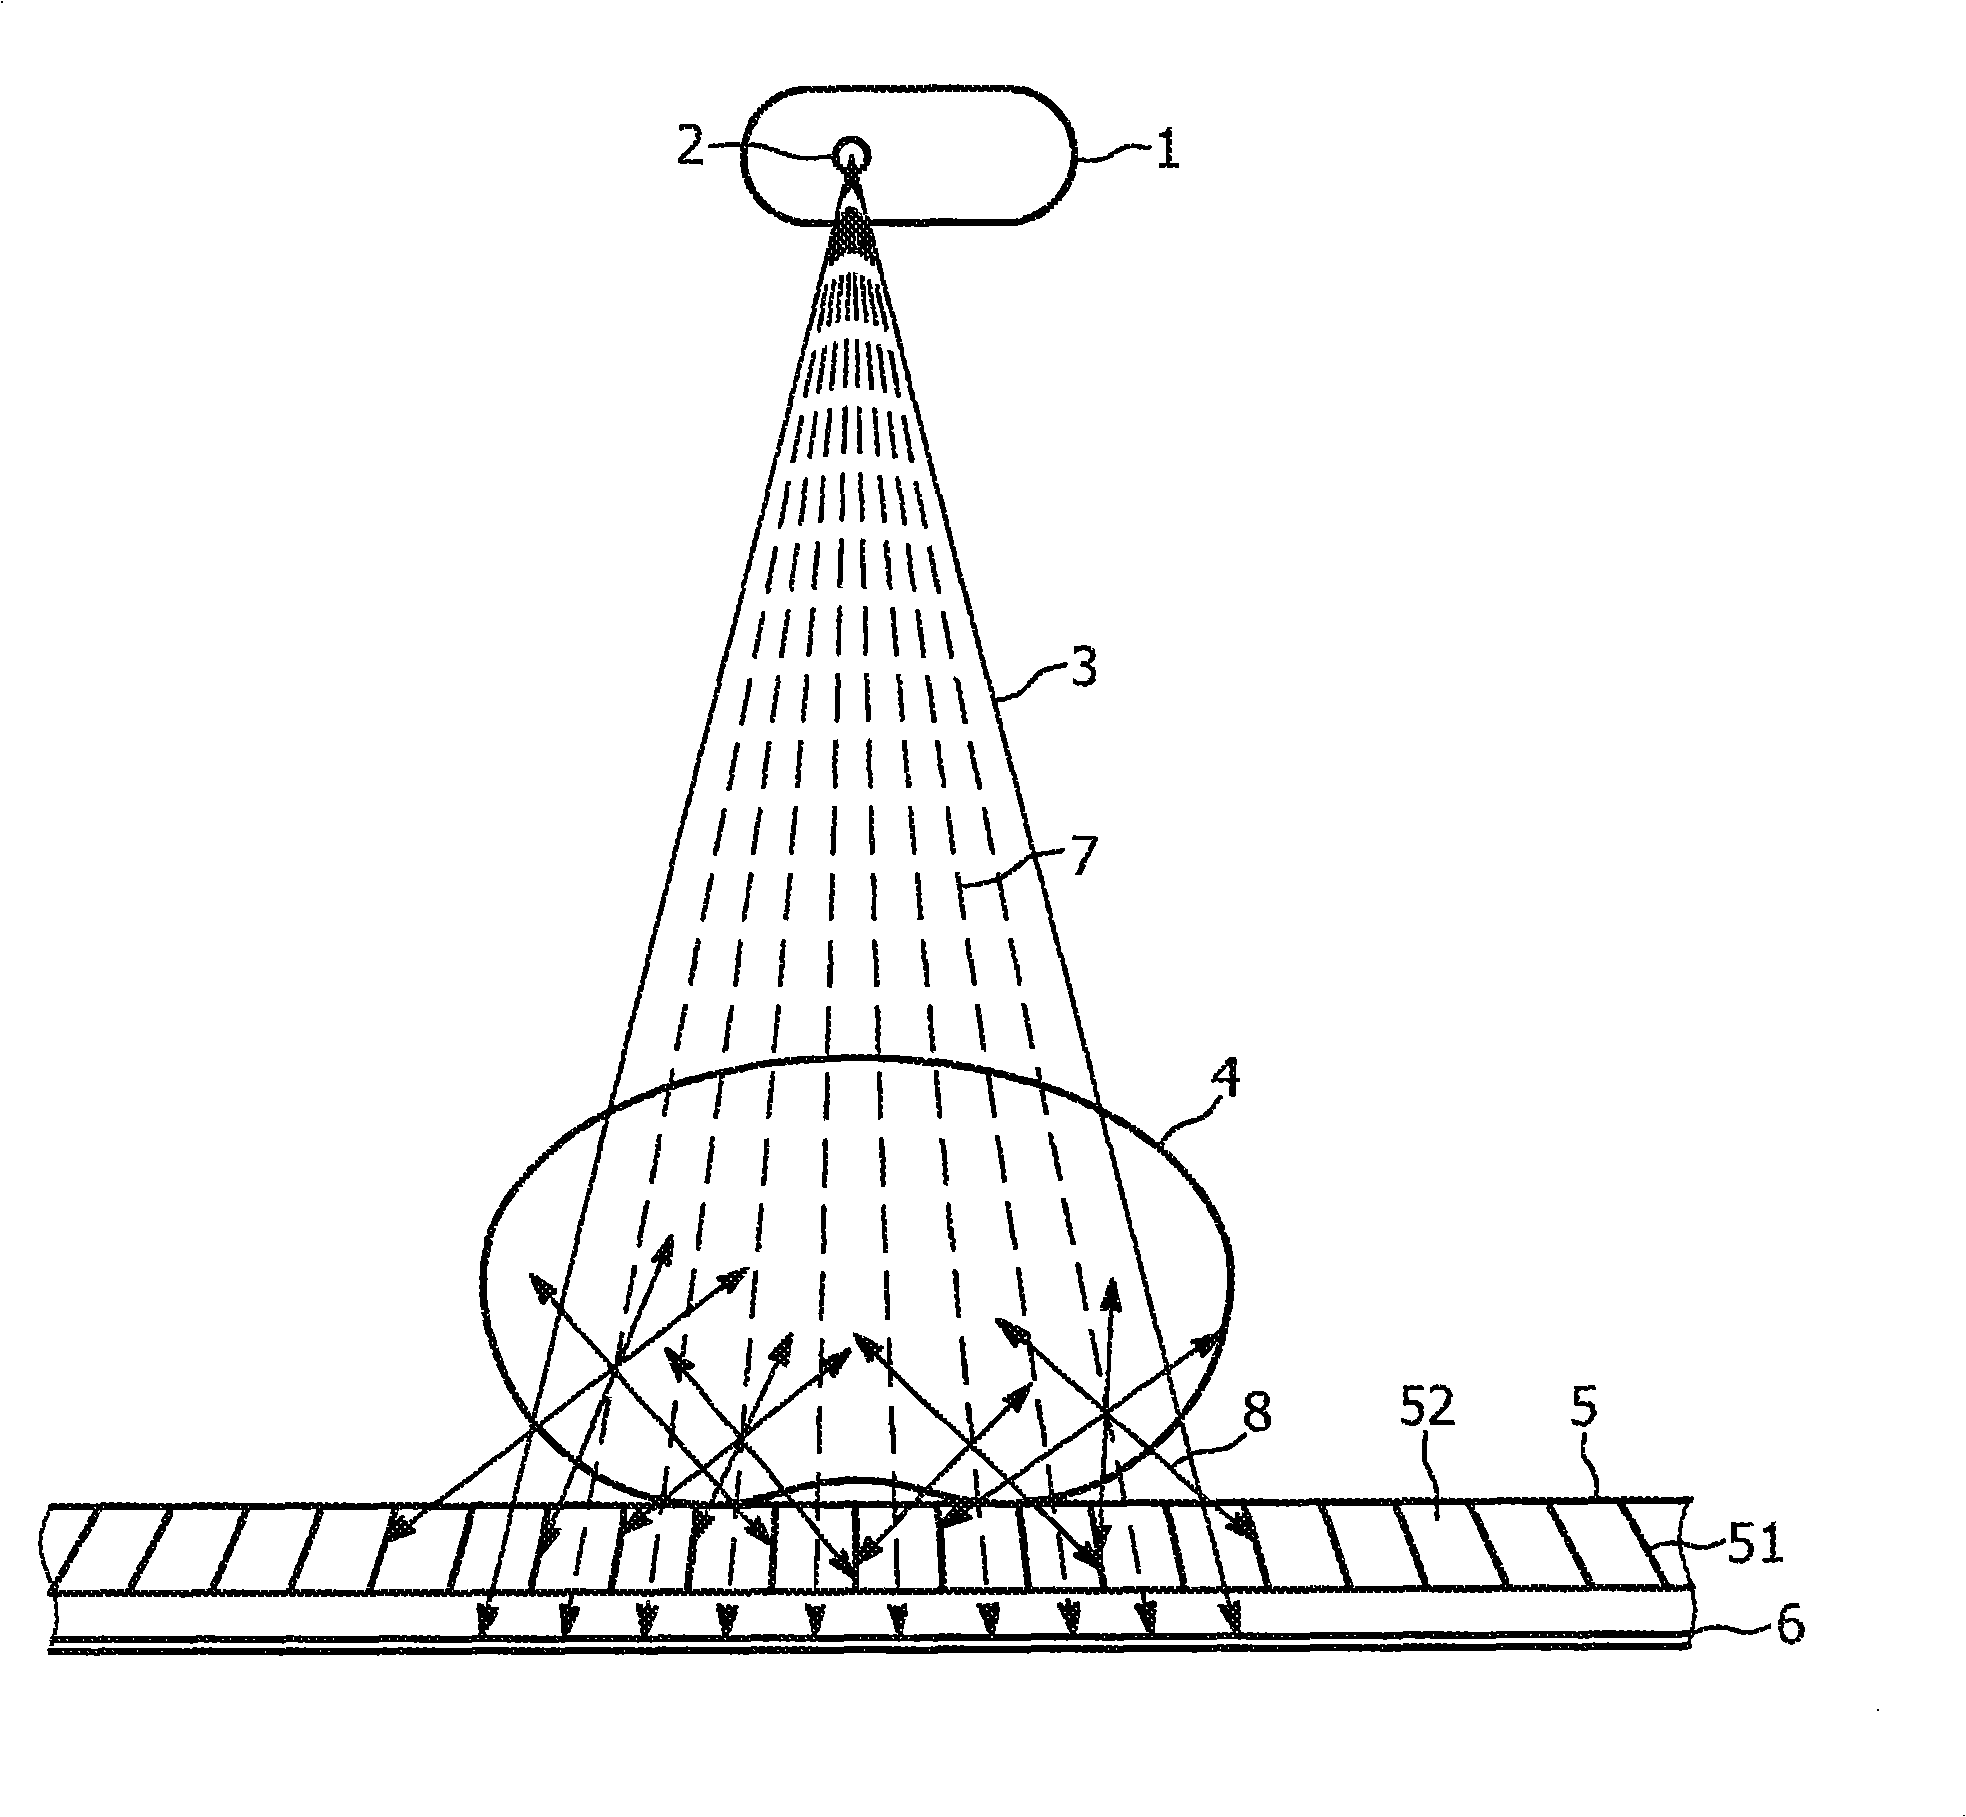 Anti-scatter grid for an x-ray device with non-uniform distance and/or width of the lamellae